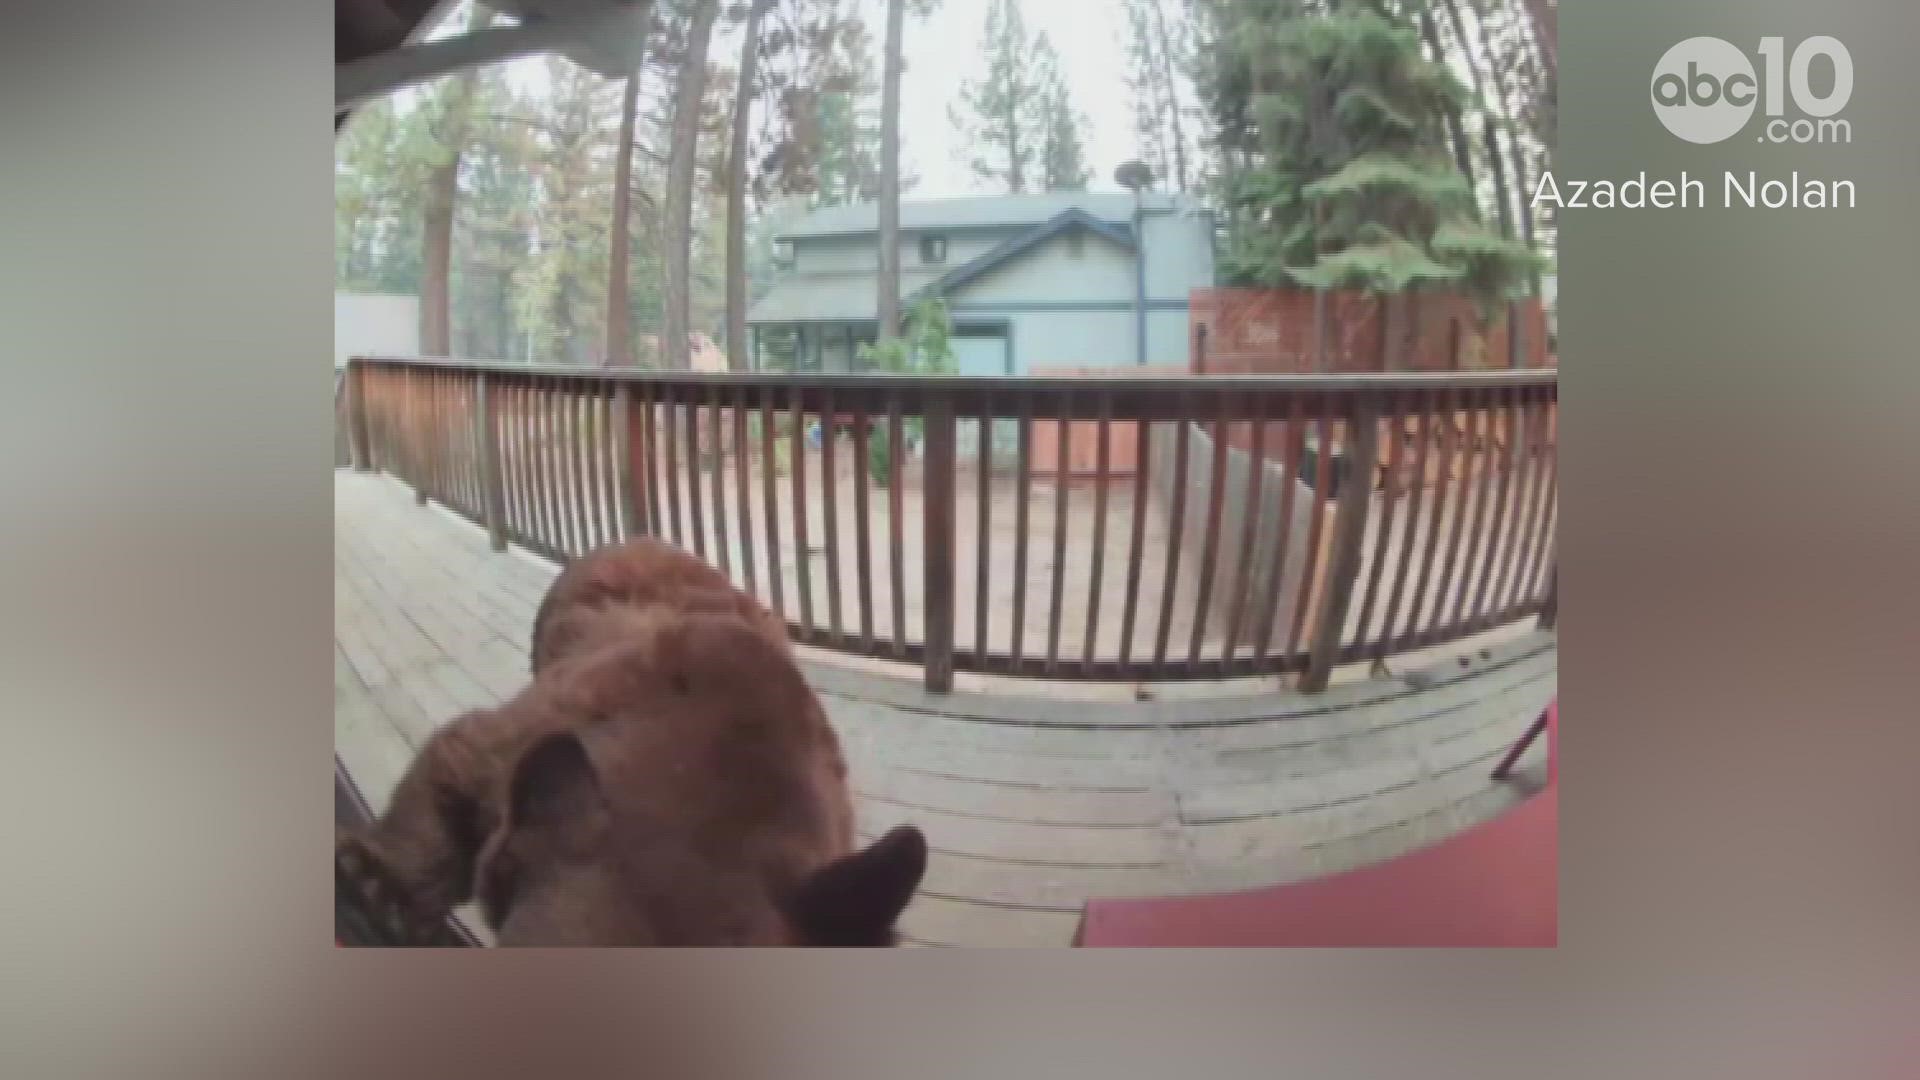 Azadeh Nolan is the owner of a cabin in South Lake Tahoe who captured FOUR bears come up to her front door yesterday.